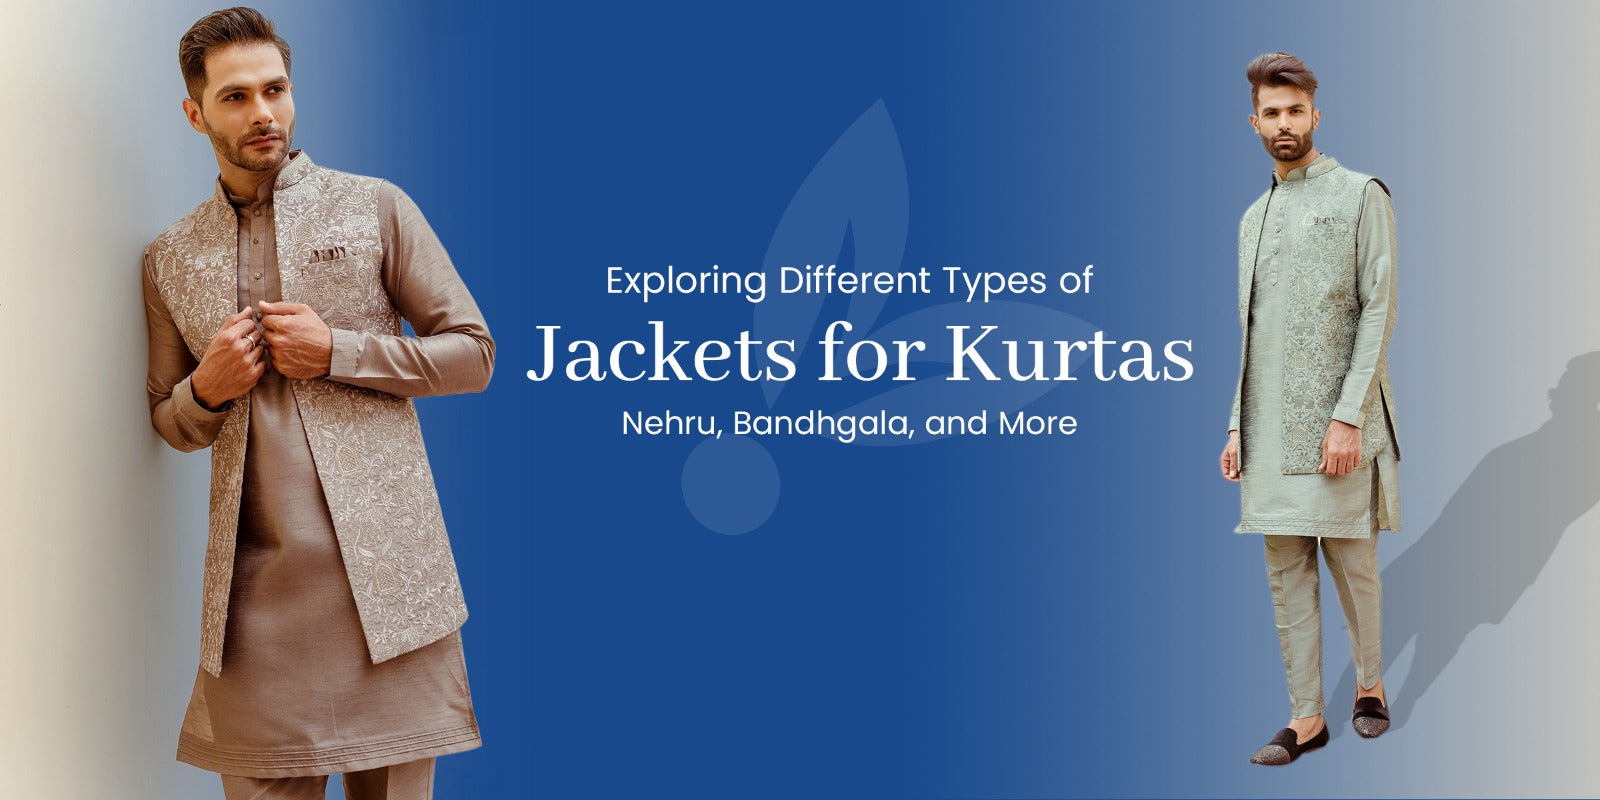 Exploring Different Types of Jackets for Kurtas: Nehru, Bandhgala, and More